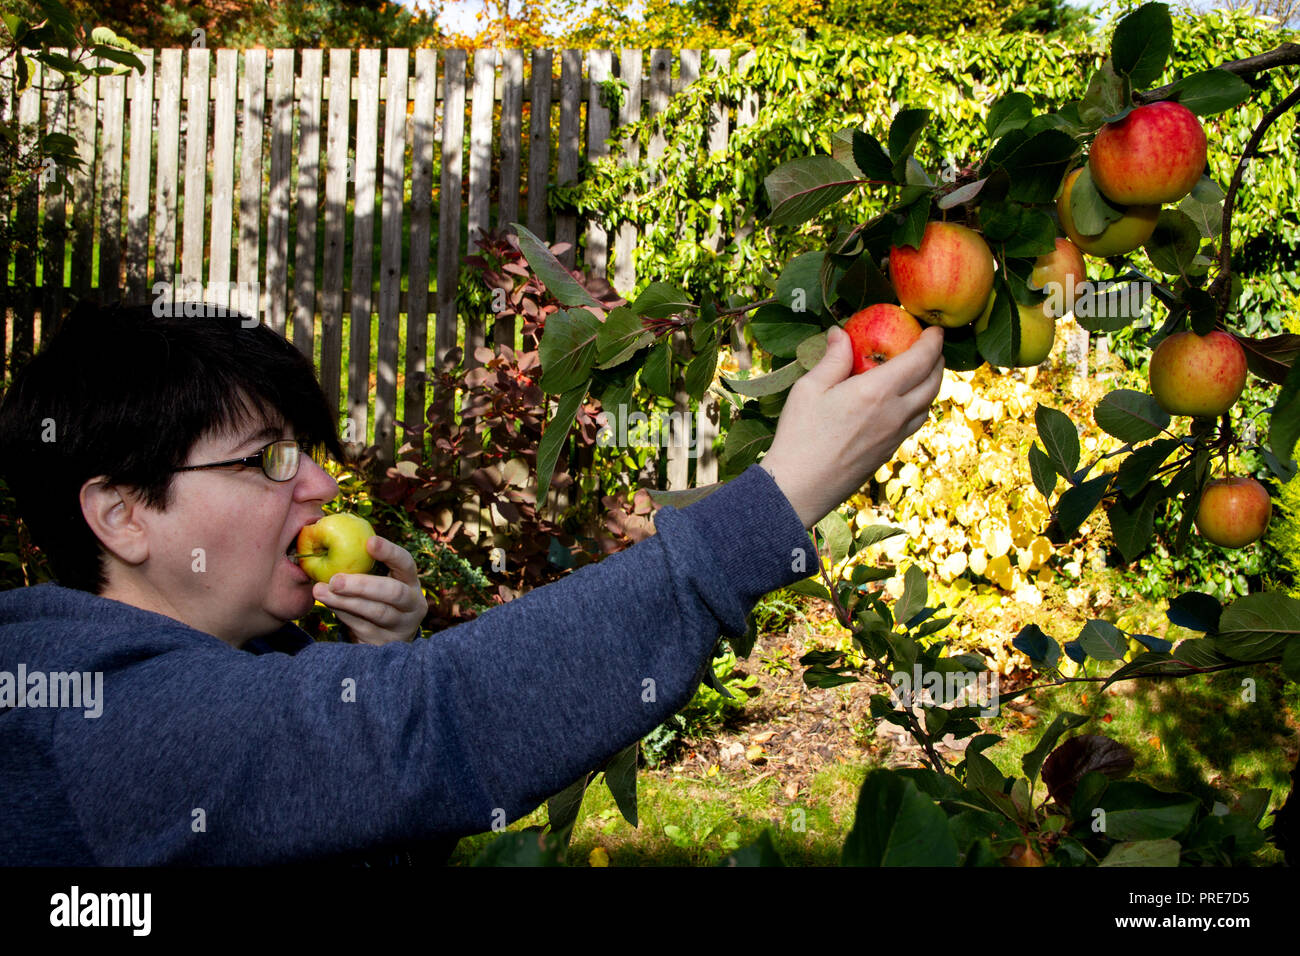 Dundee, Tayside, Scotland, UK. 2nd October, 2018. UK weather: The warm weather continues into  October with temperatures reaching 14º Celsius. A woman is harvesting organic home grown James Grieves apples inside her garden in Dundee Scotland. Credit: Dundee Photographics / Alamy Live News Stock Photo